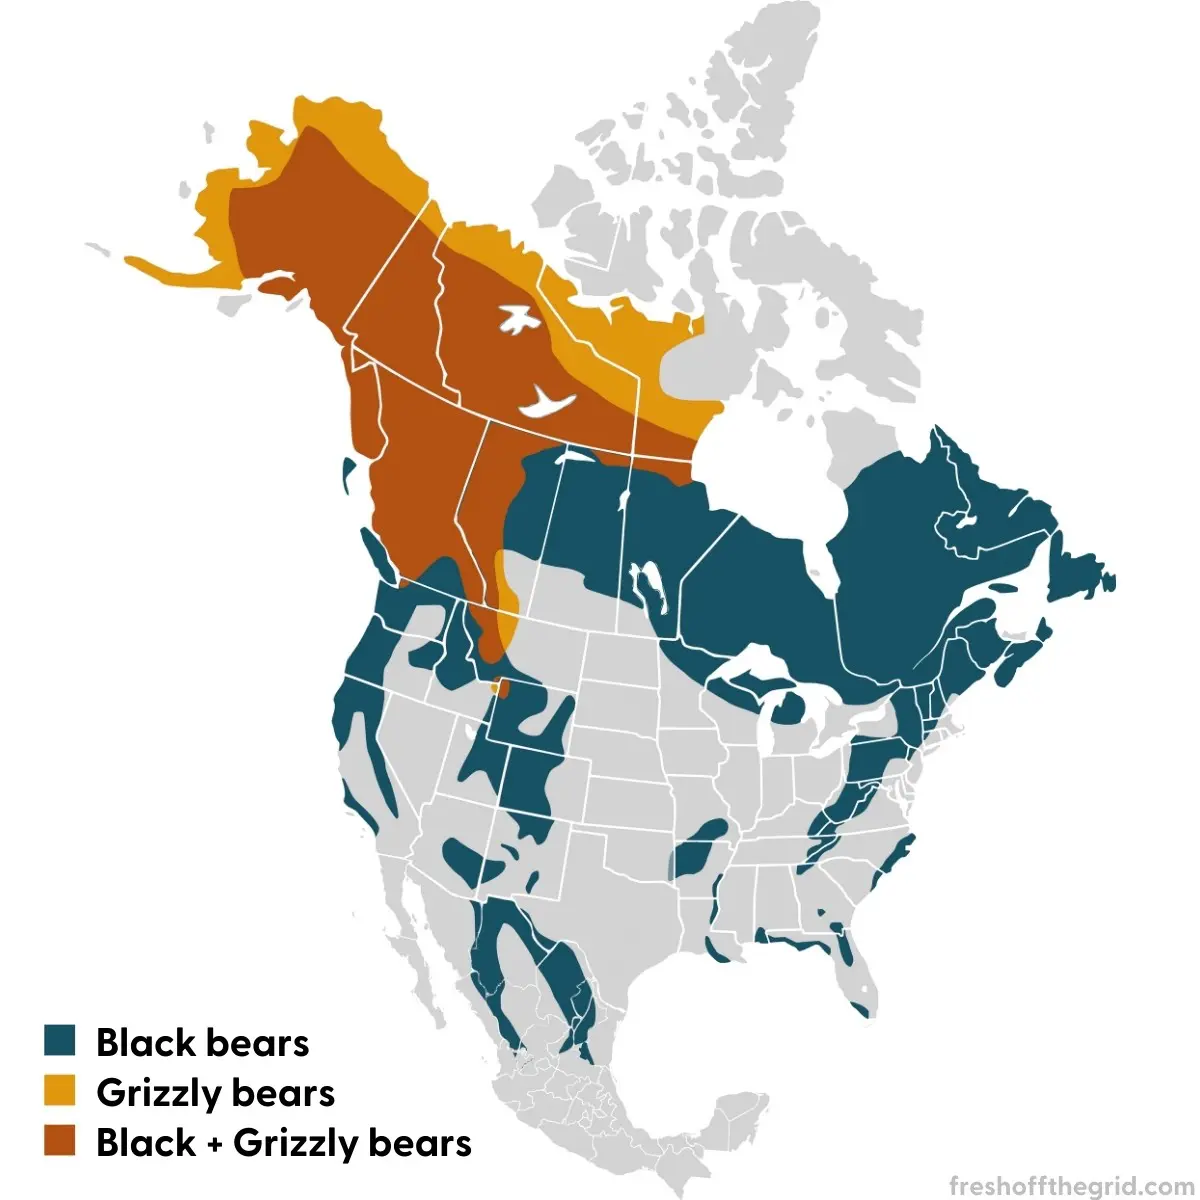 Map of North America depicting black bear and grizzly bear habitats